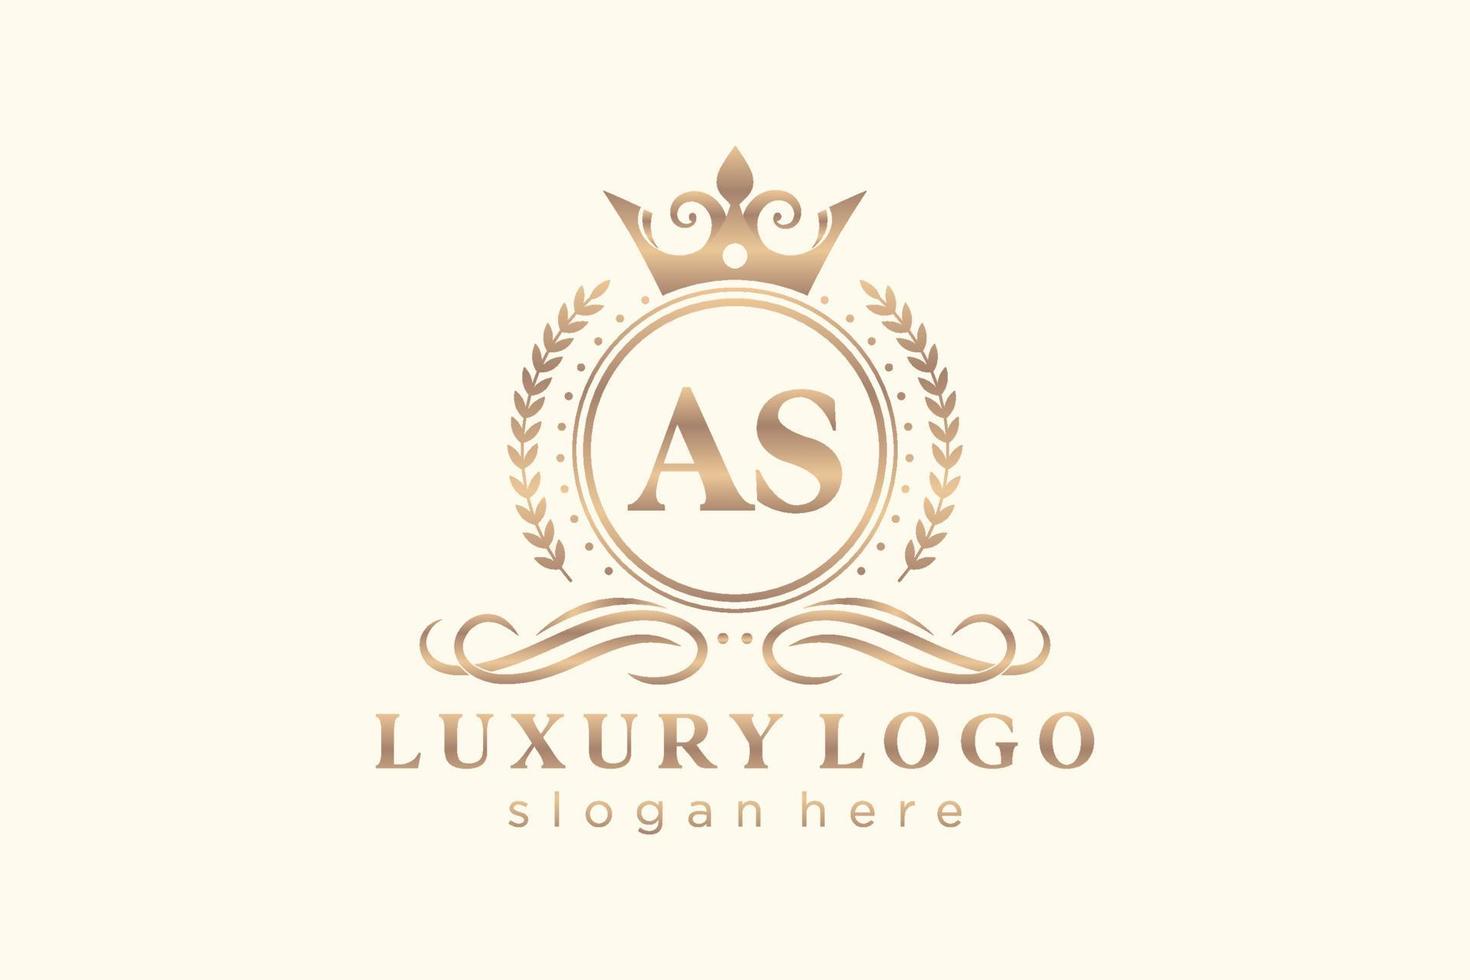 Initial AS Letter Royal Luxury Logo template in vector art for Restaurant, Royalty, Boutique, Cafe, Hotel, Heraldic, Jewelry, Fashion and other vector illustration.